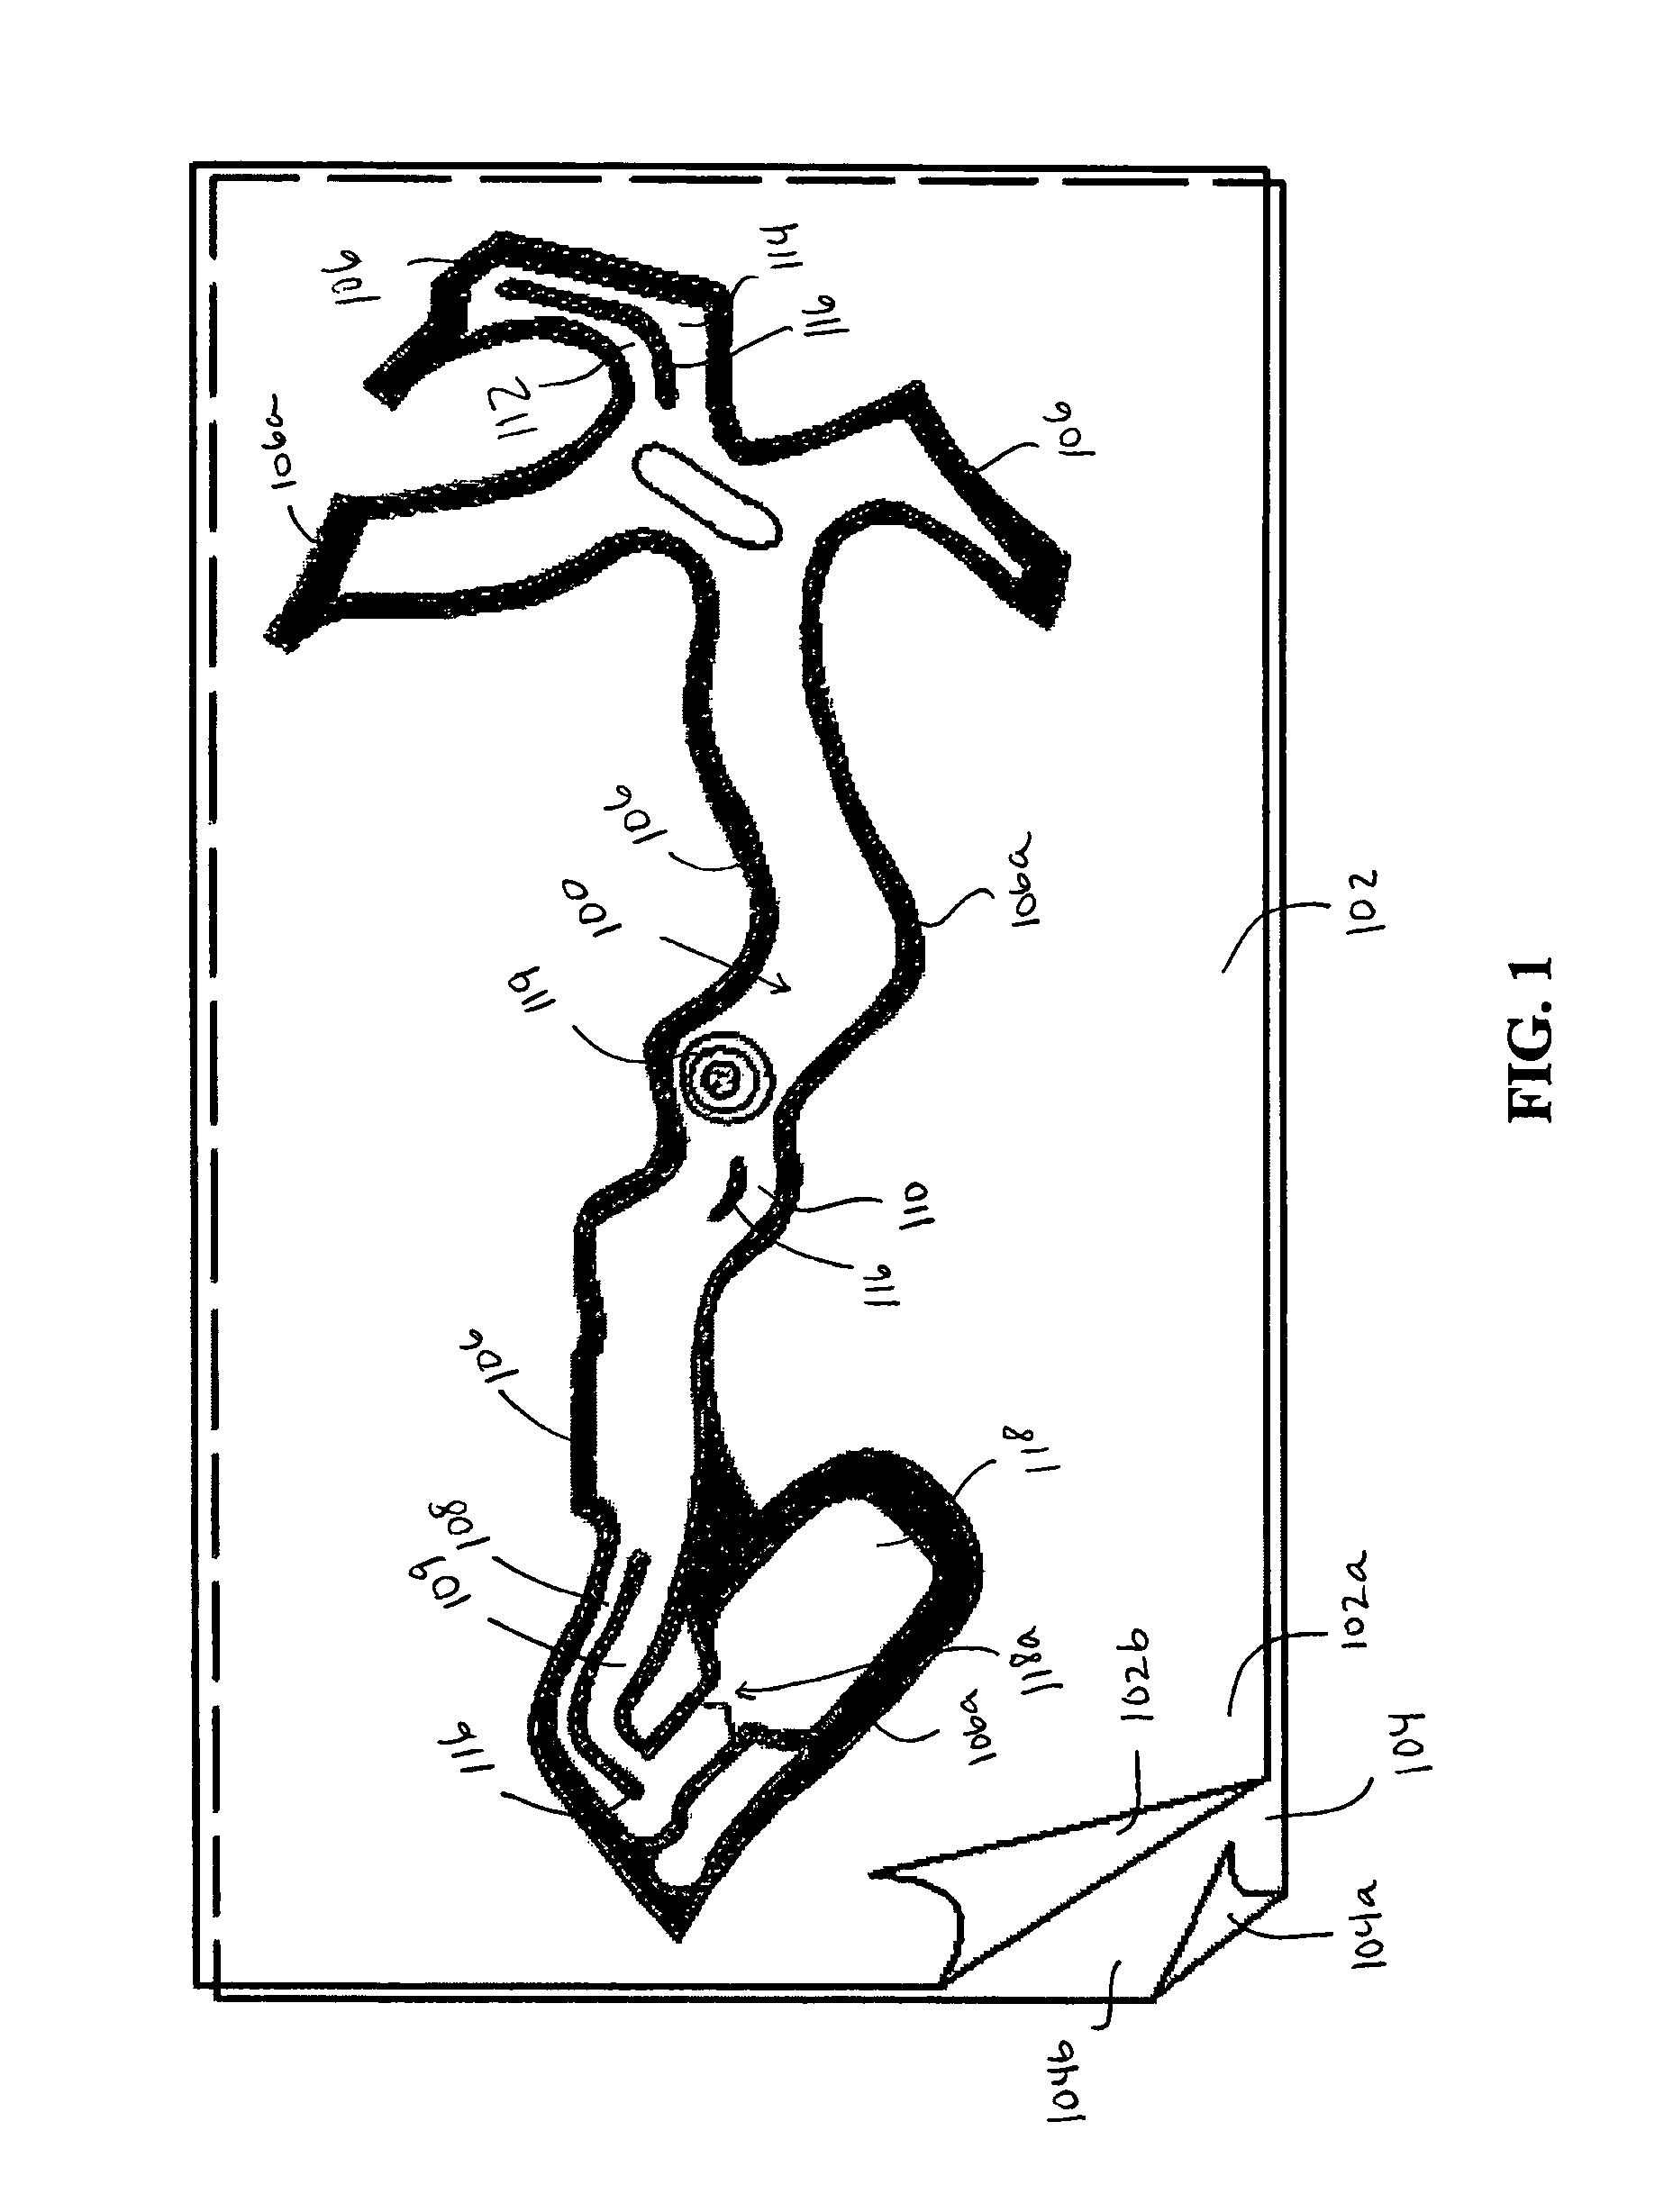 Air passage device for inflatable shoe bladders